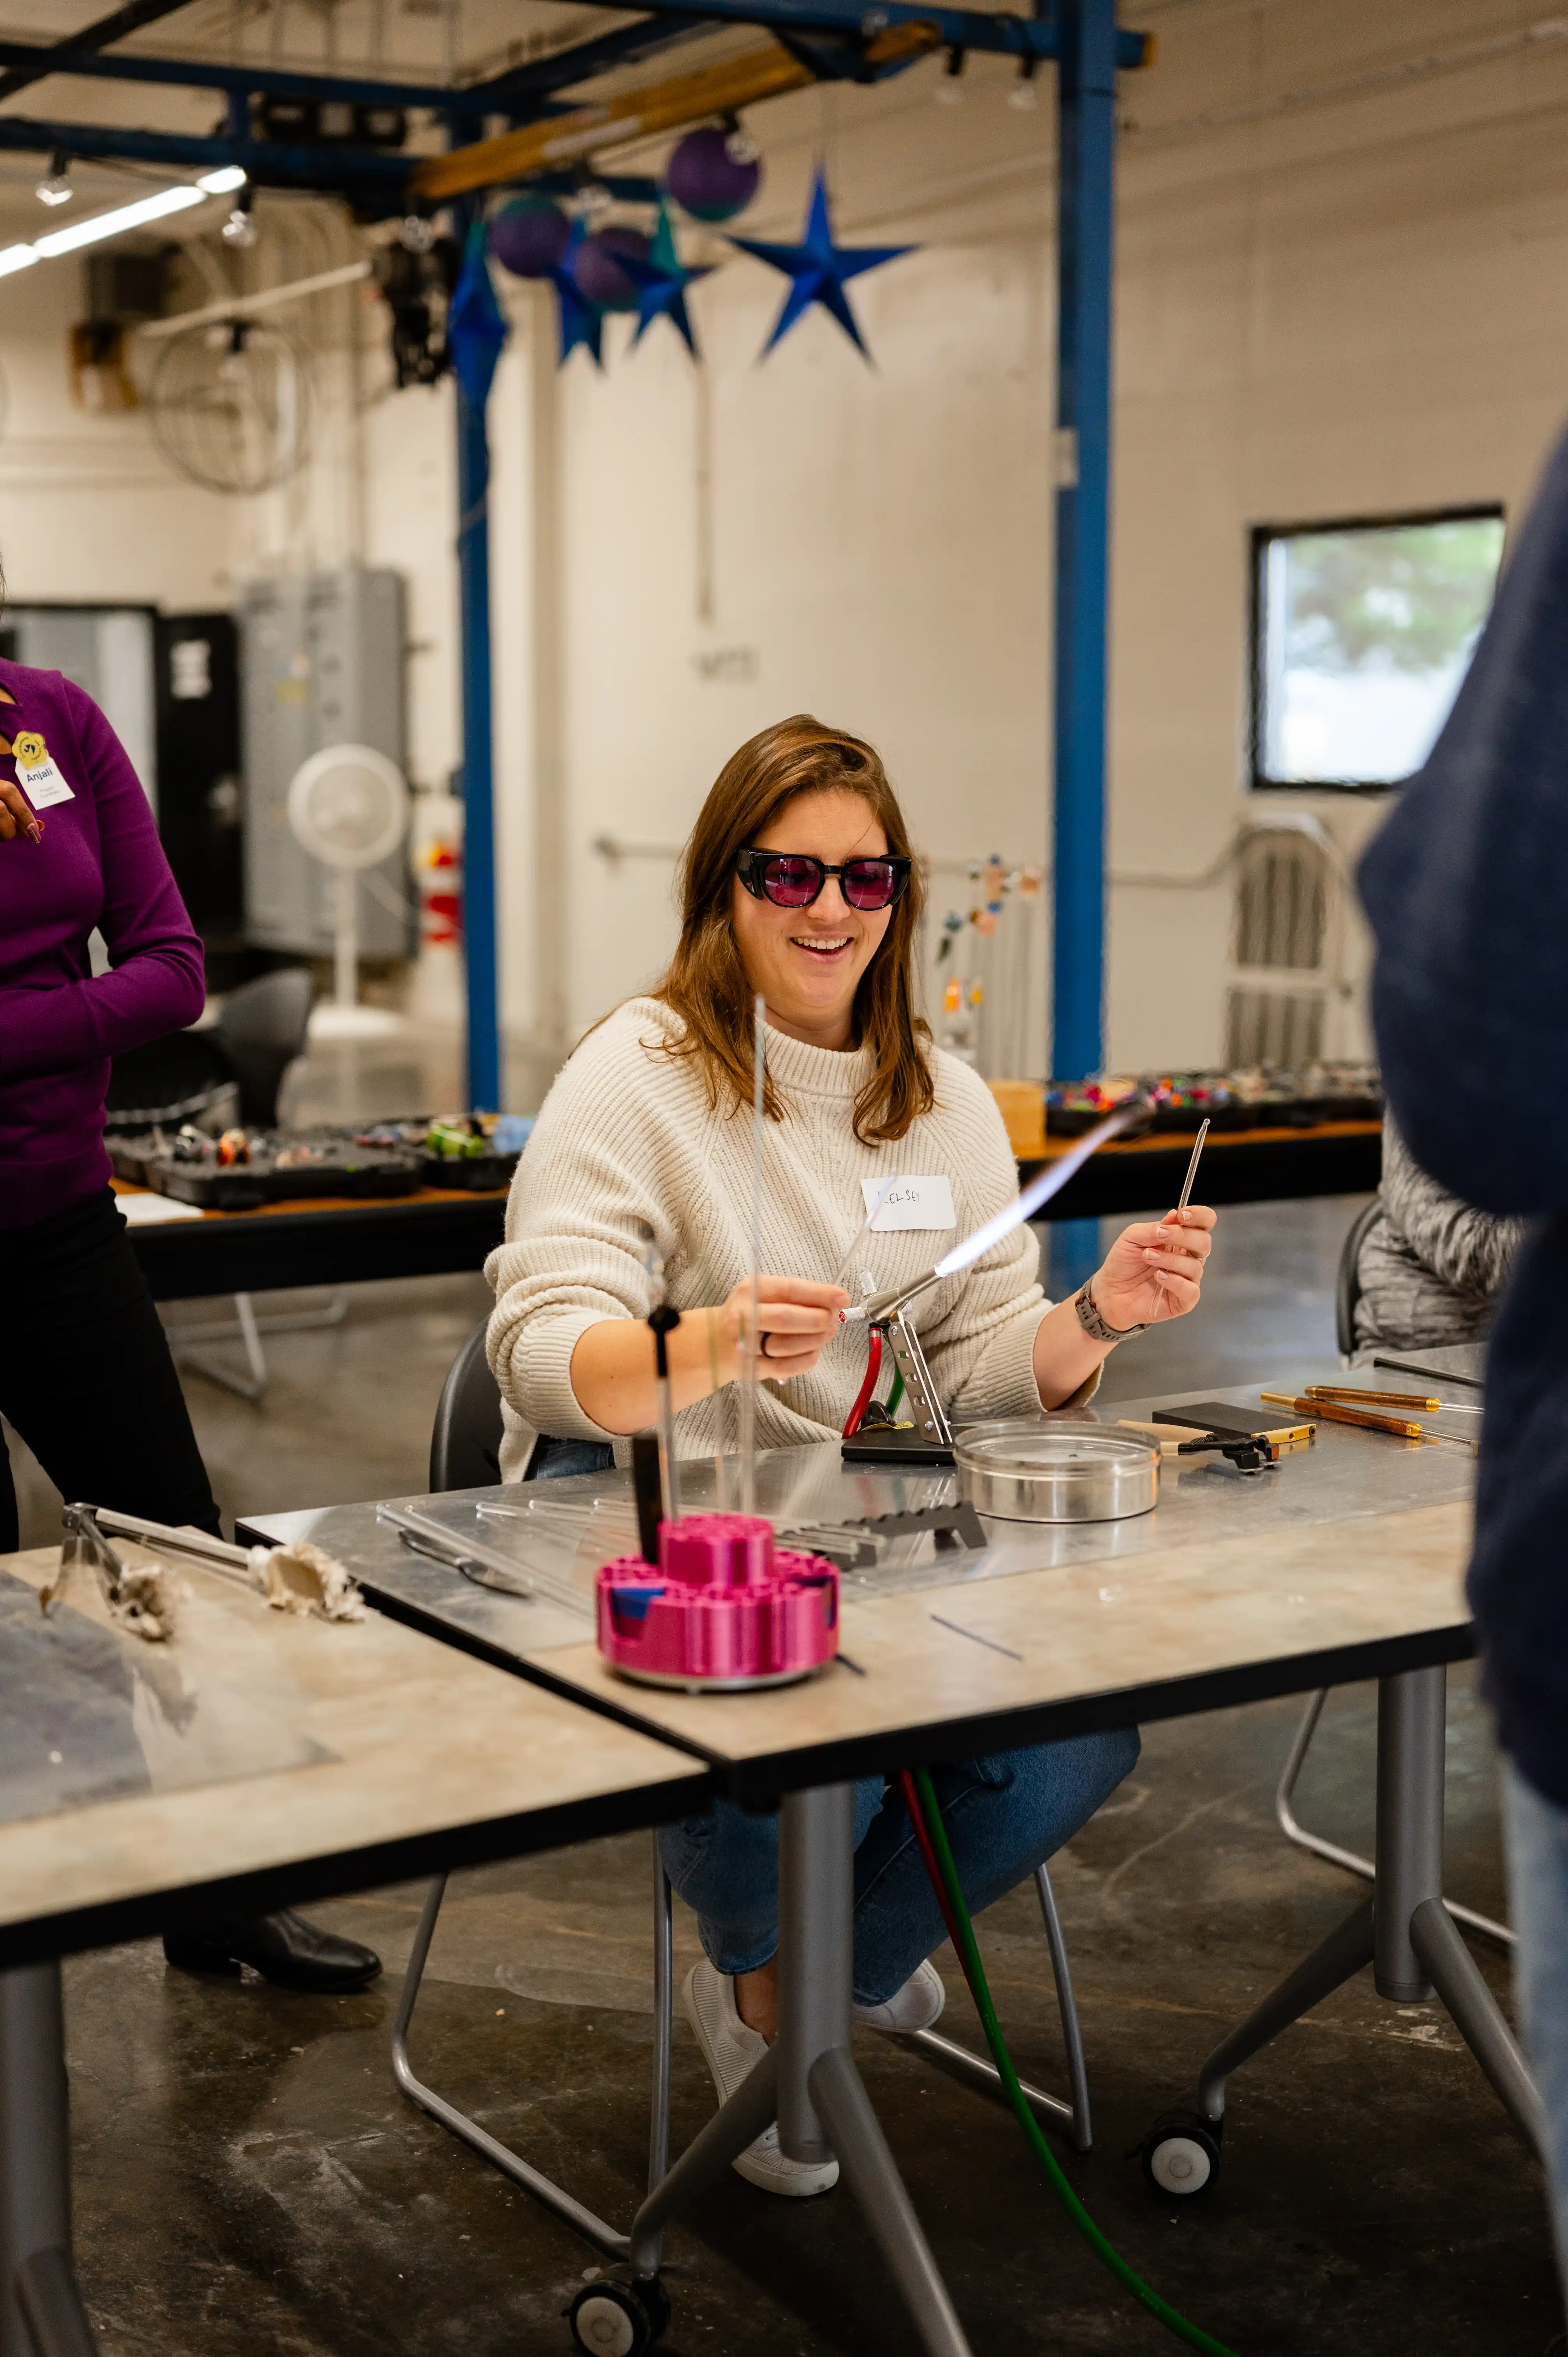 Woman wearing safety glasses sitting at a workshop table, smiling and holding a tool, with other participants and equipment around her.